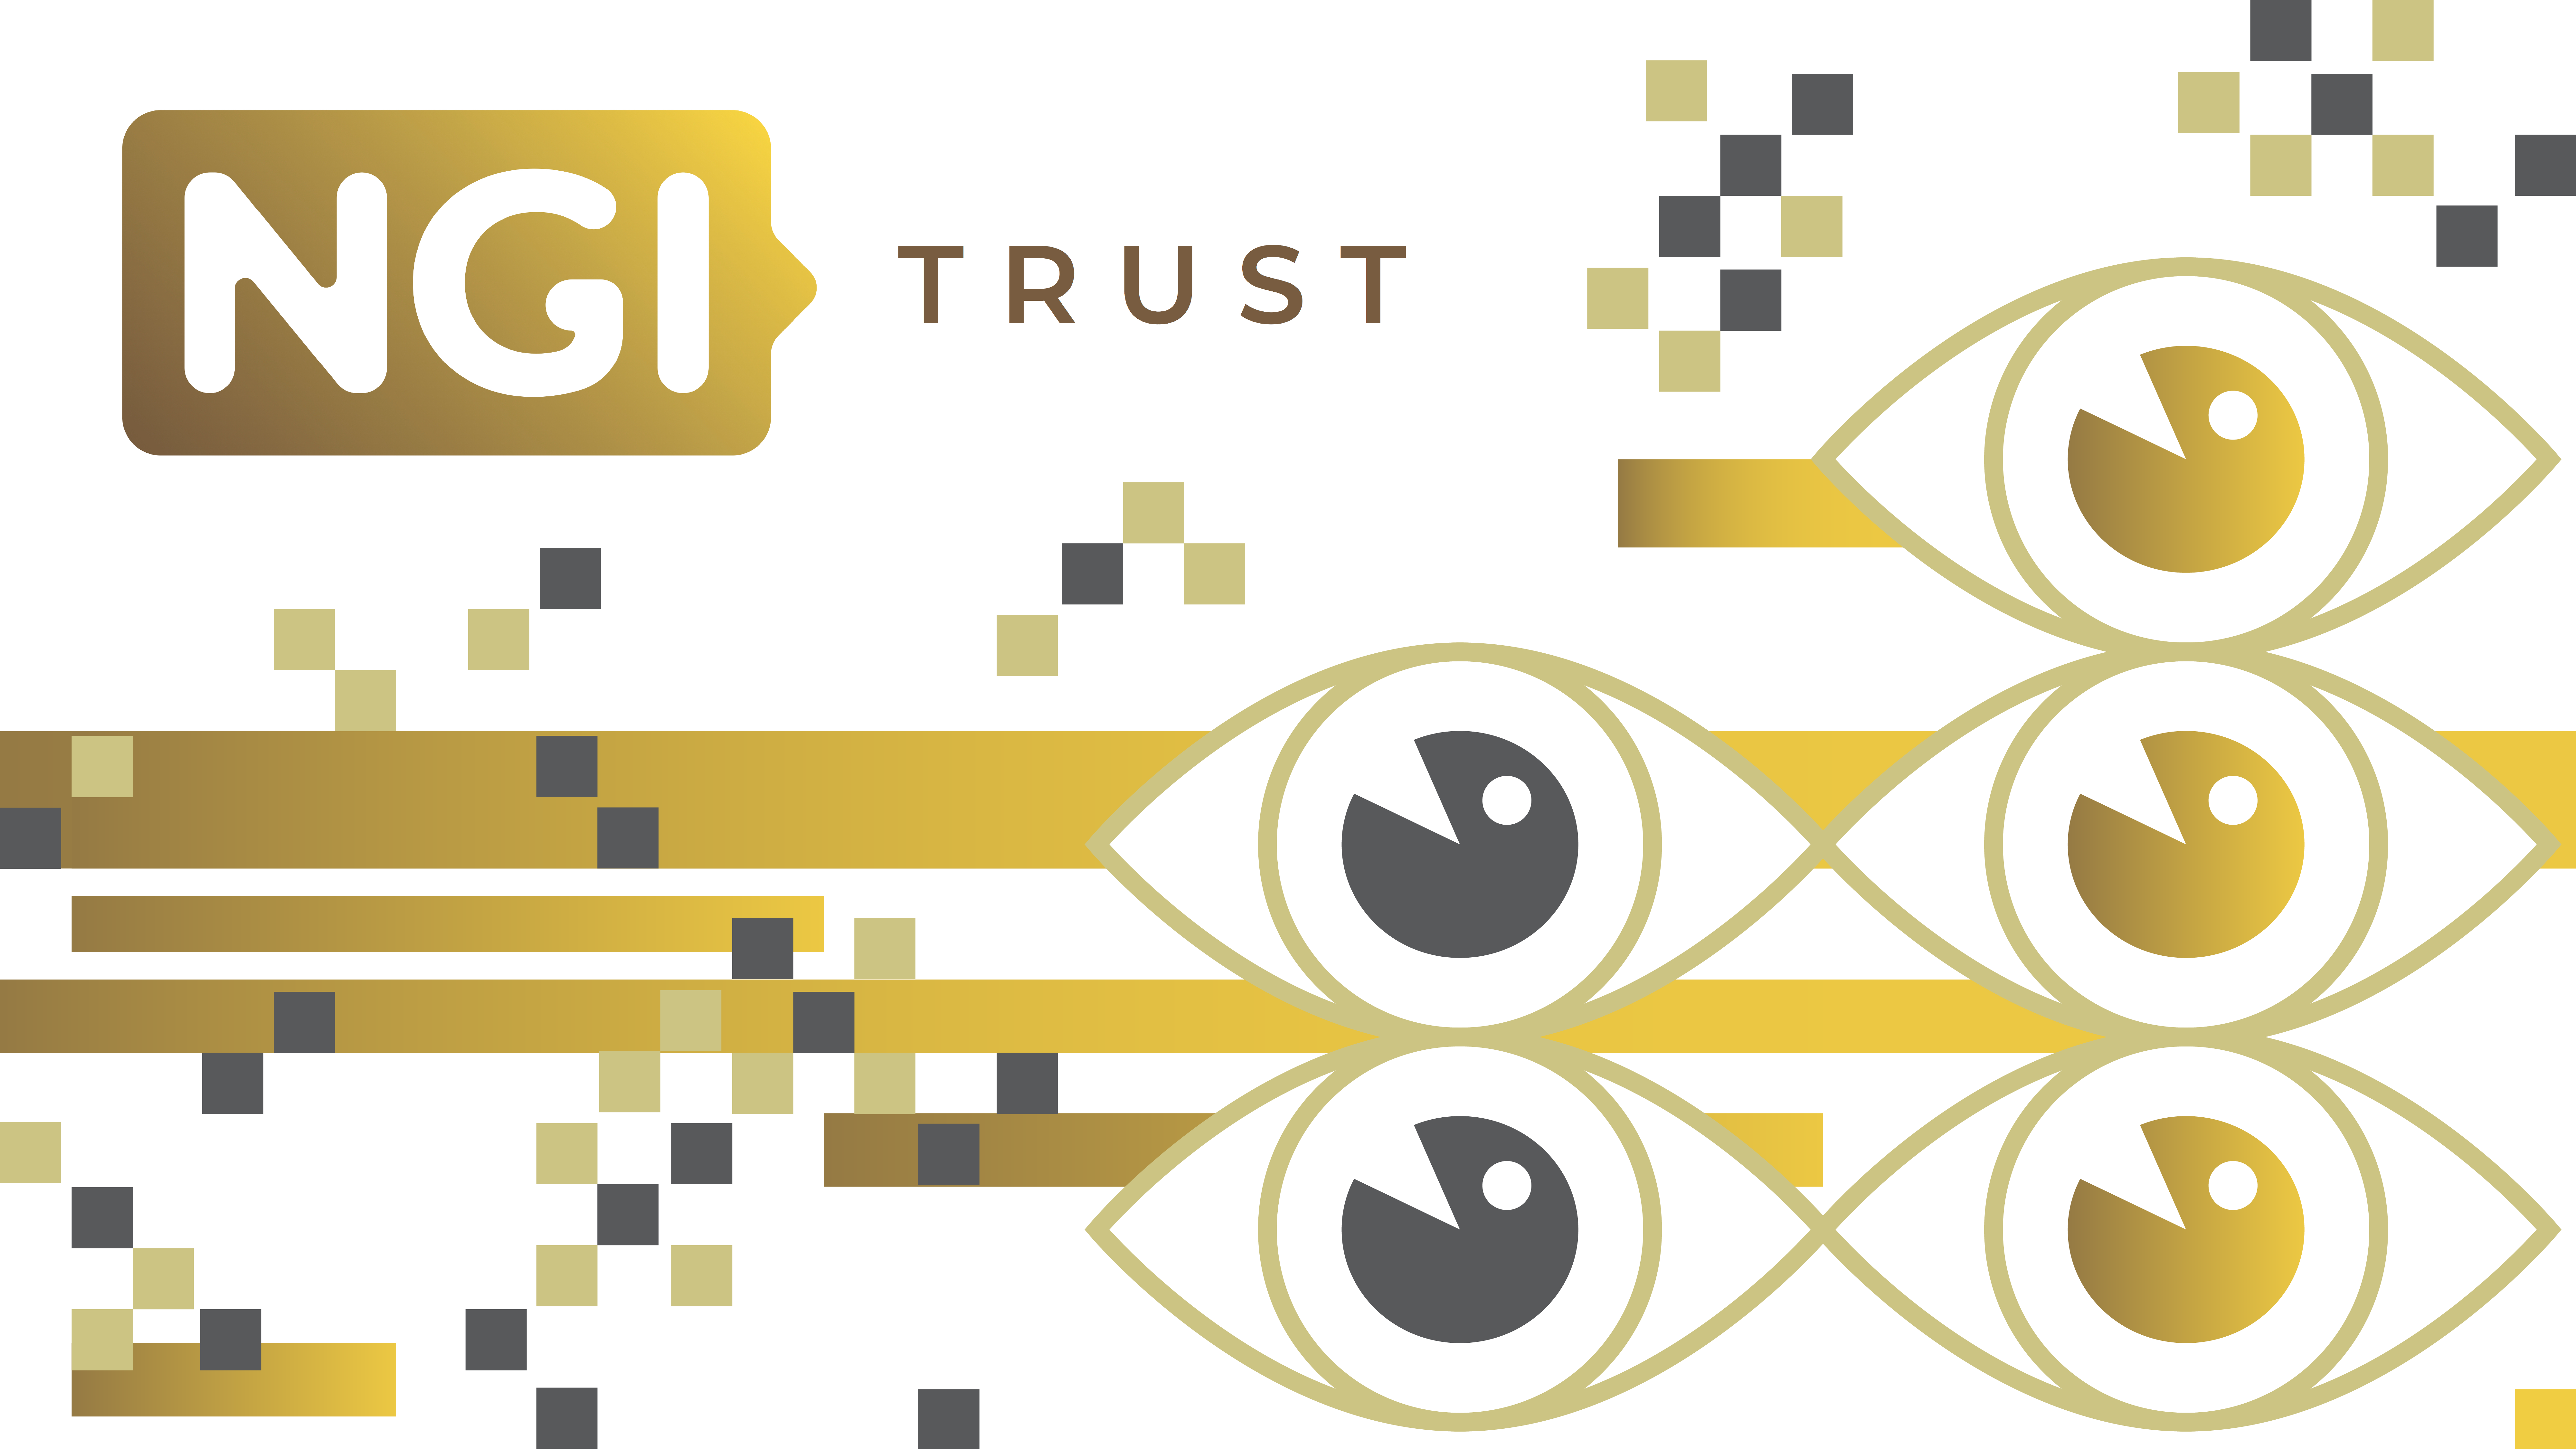 NGI_Trust - six new case studies advance privacy and trust